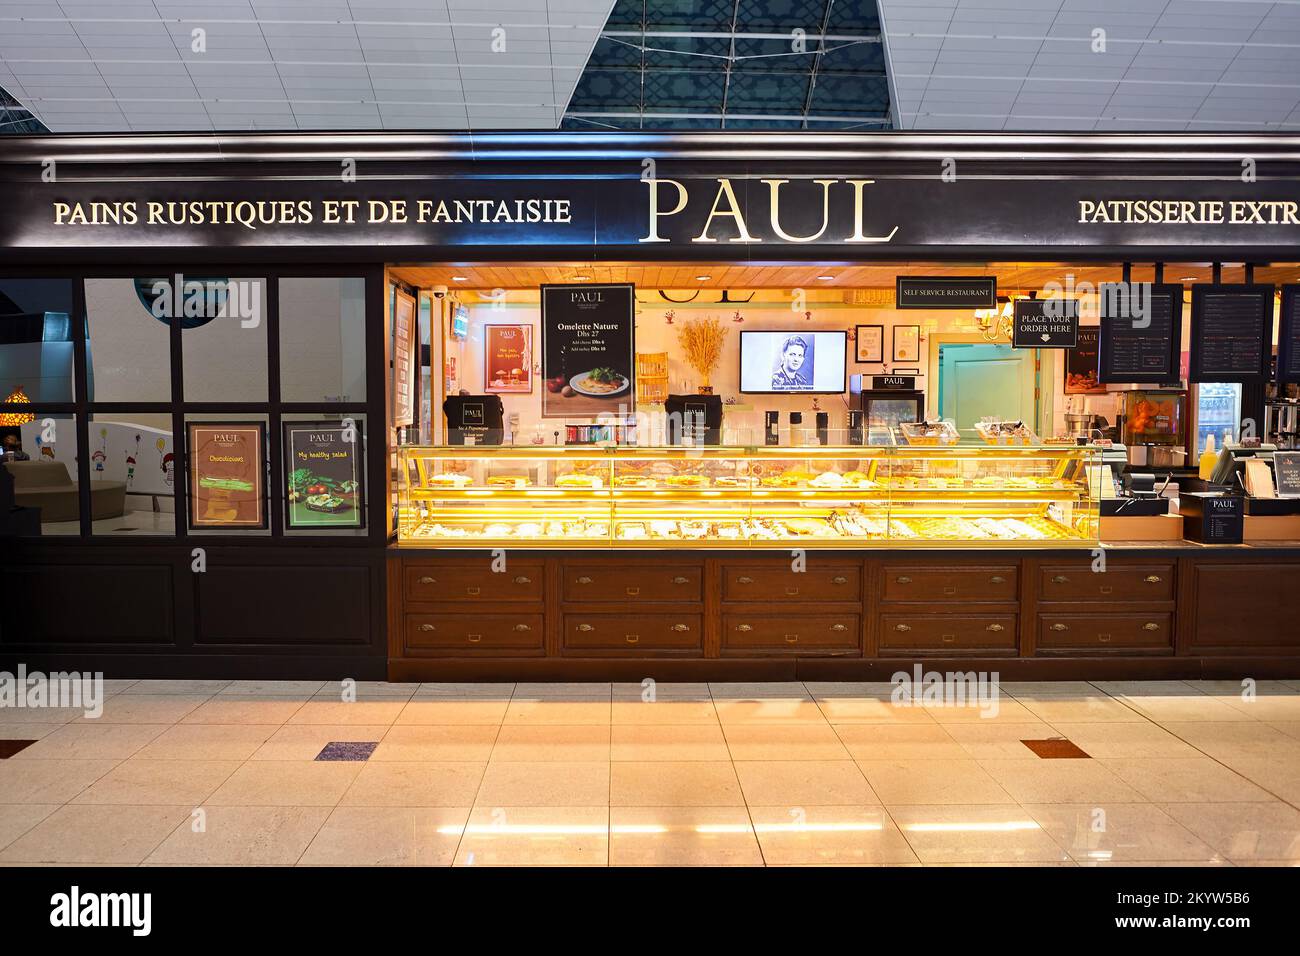 DUBAI, UAE - NOVEMBER 16, 2015: interior of Paul cafe. Paul is a French chain of bakery/cafe restaurants established in 1889 in the city of Croix, in Stock Photo